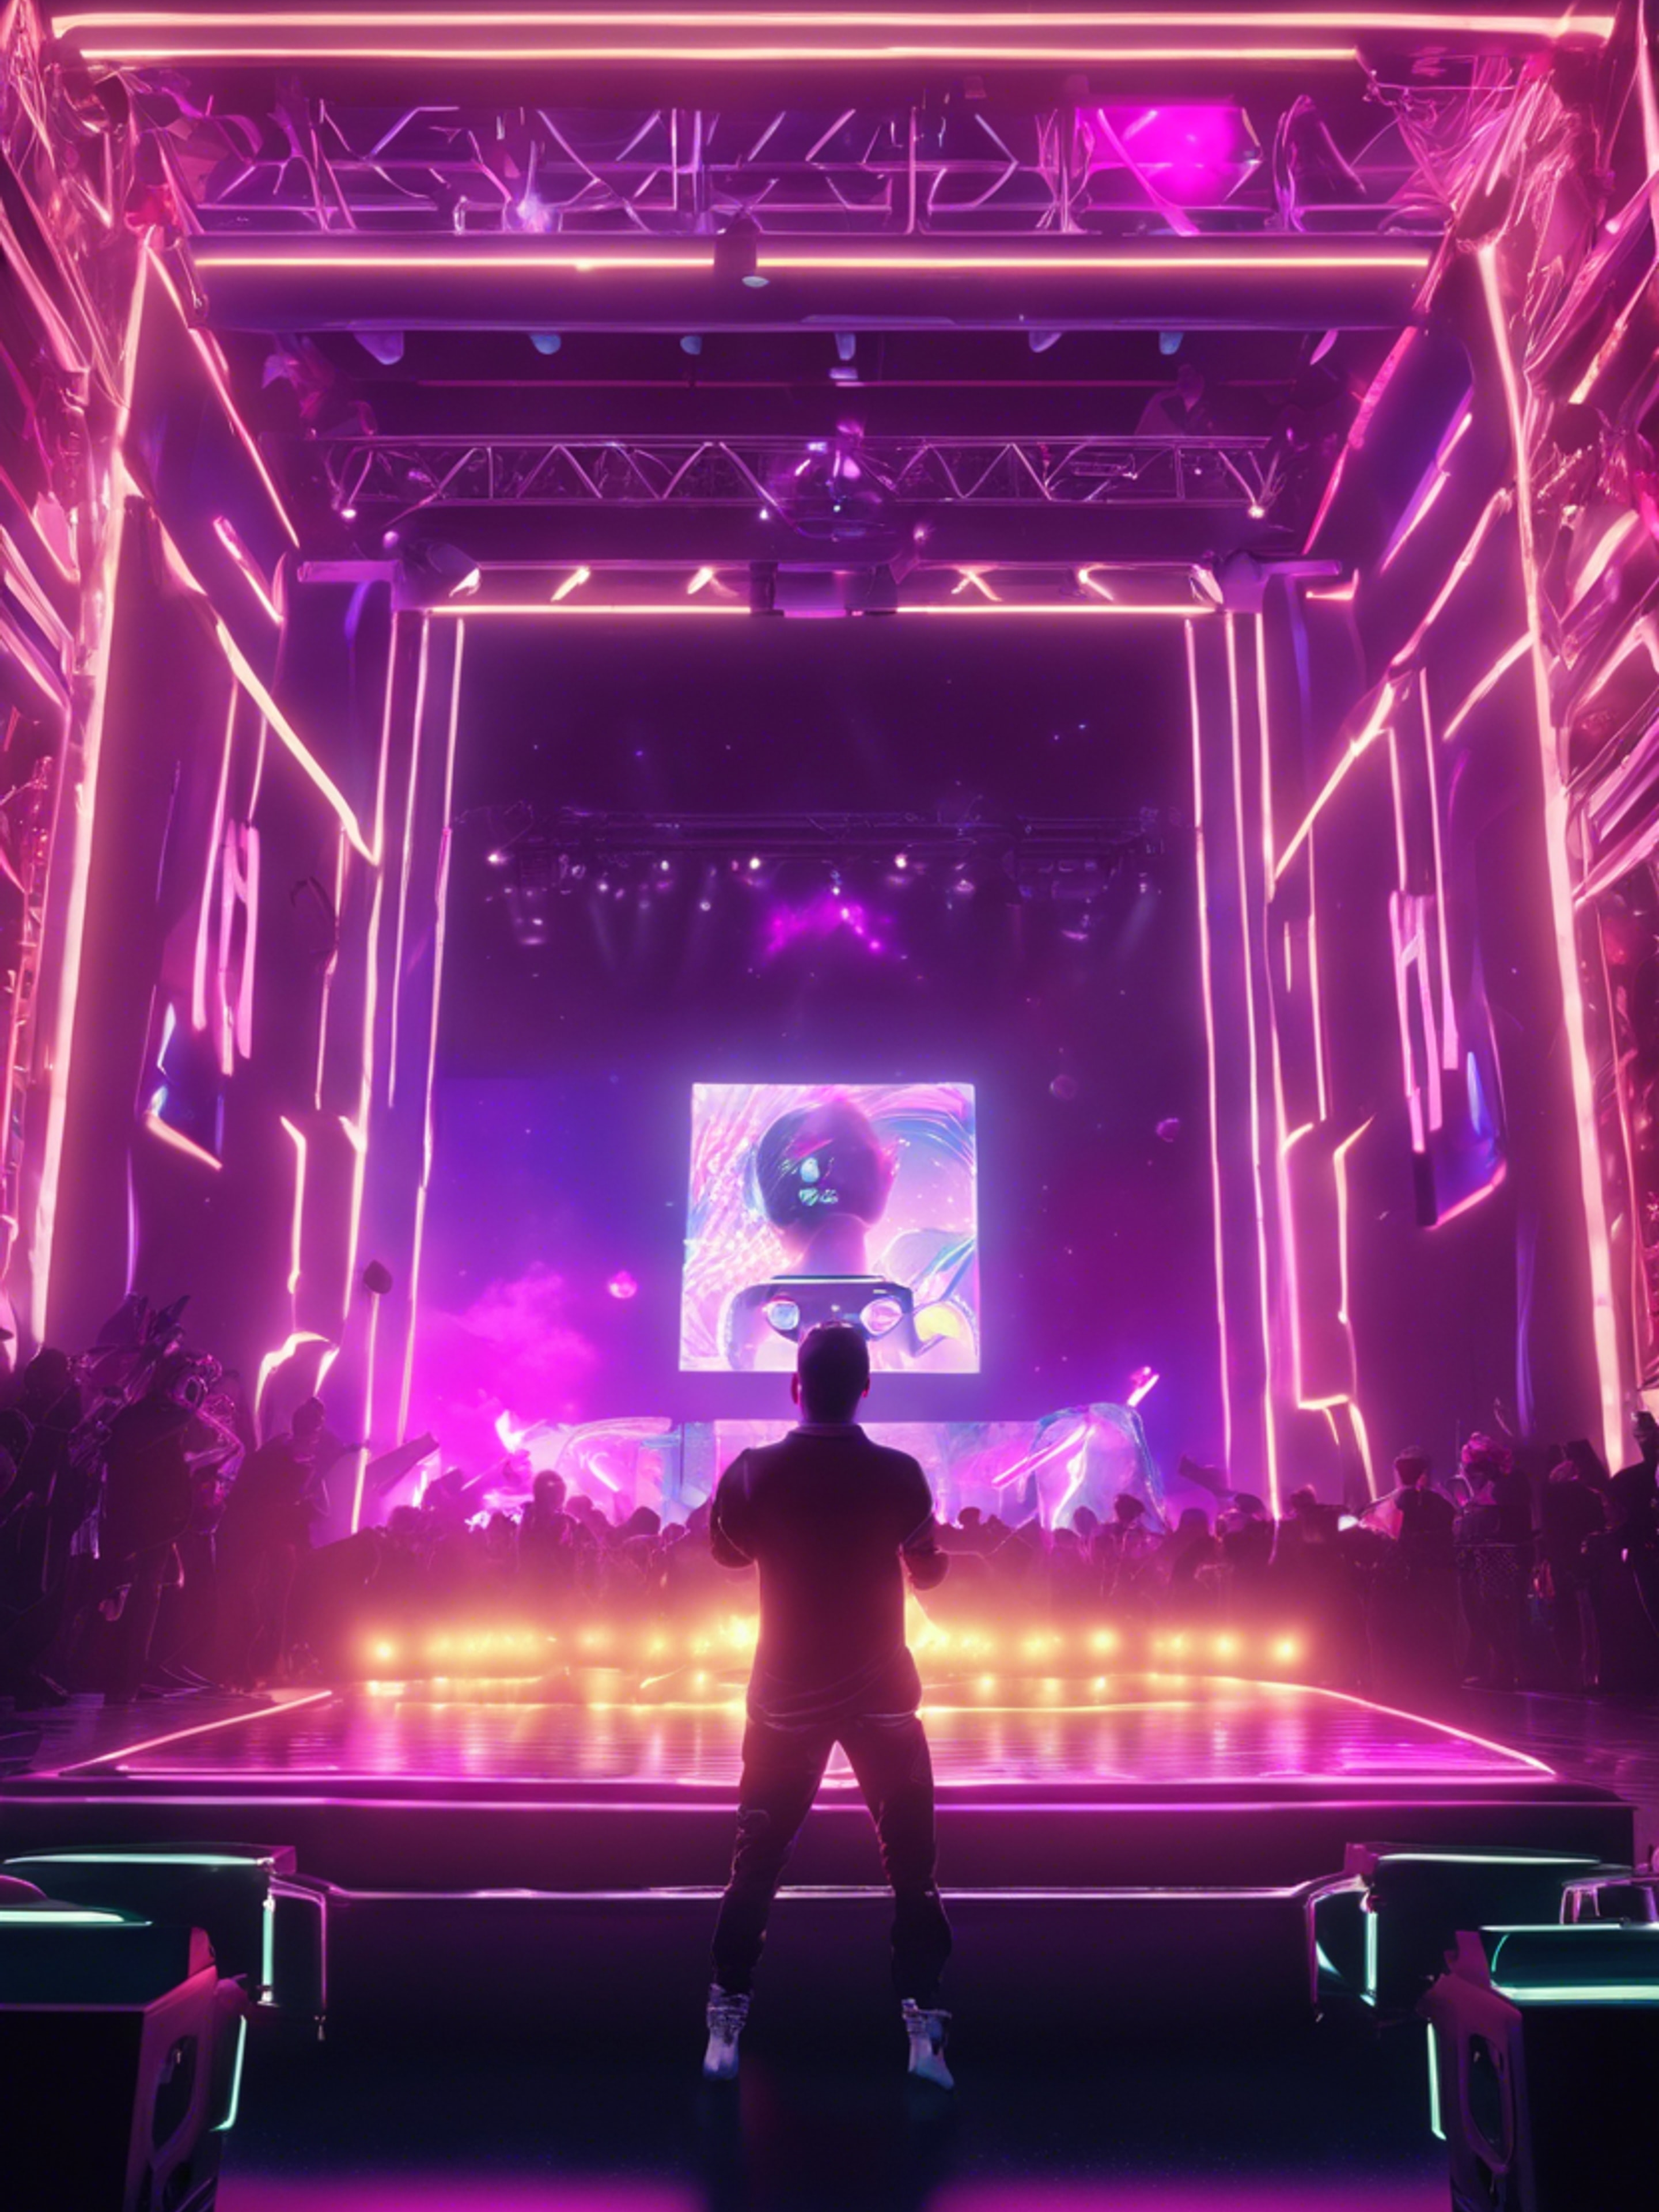 A virtual concert in a Y2K gaming environment, with neon spotlights showcasing a digital avatar performing onstage. Tapetai[570c0802add746f5a0b1]